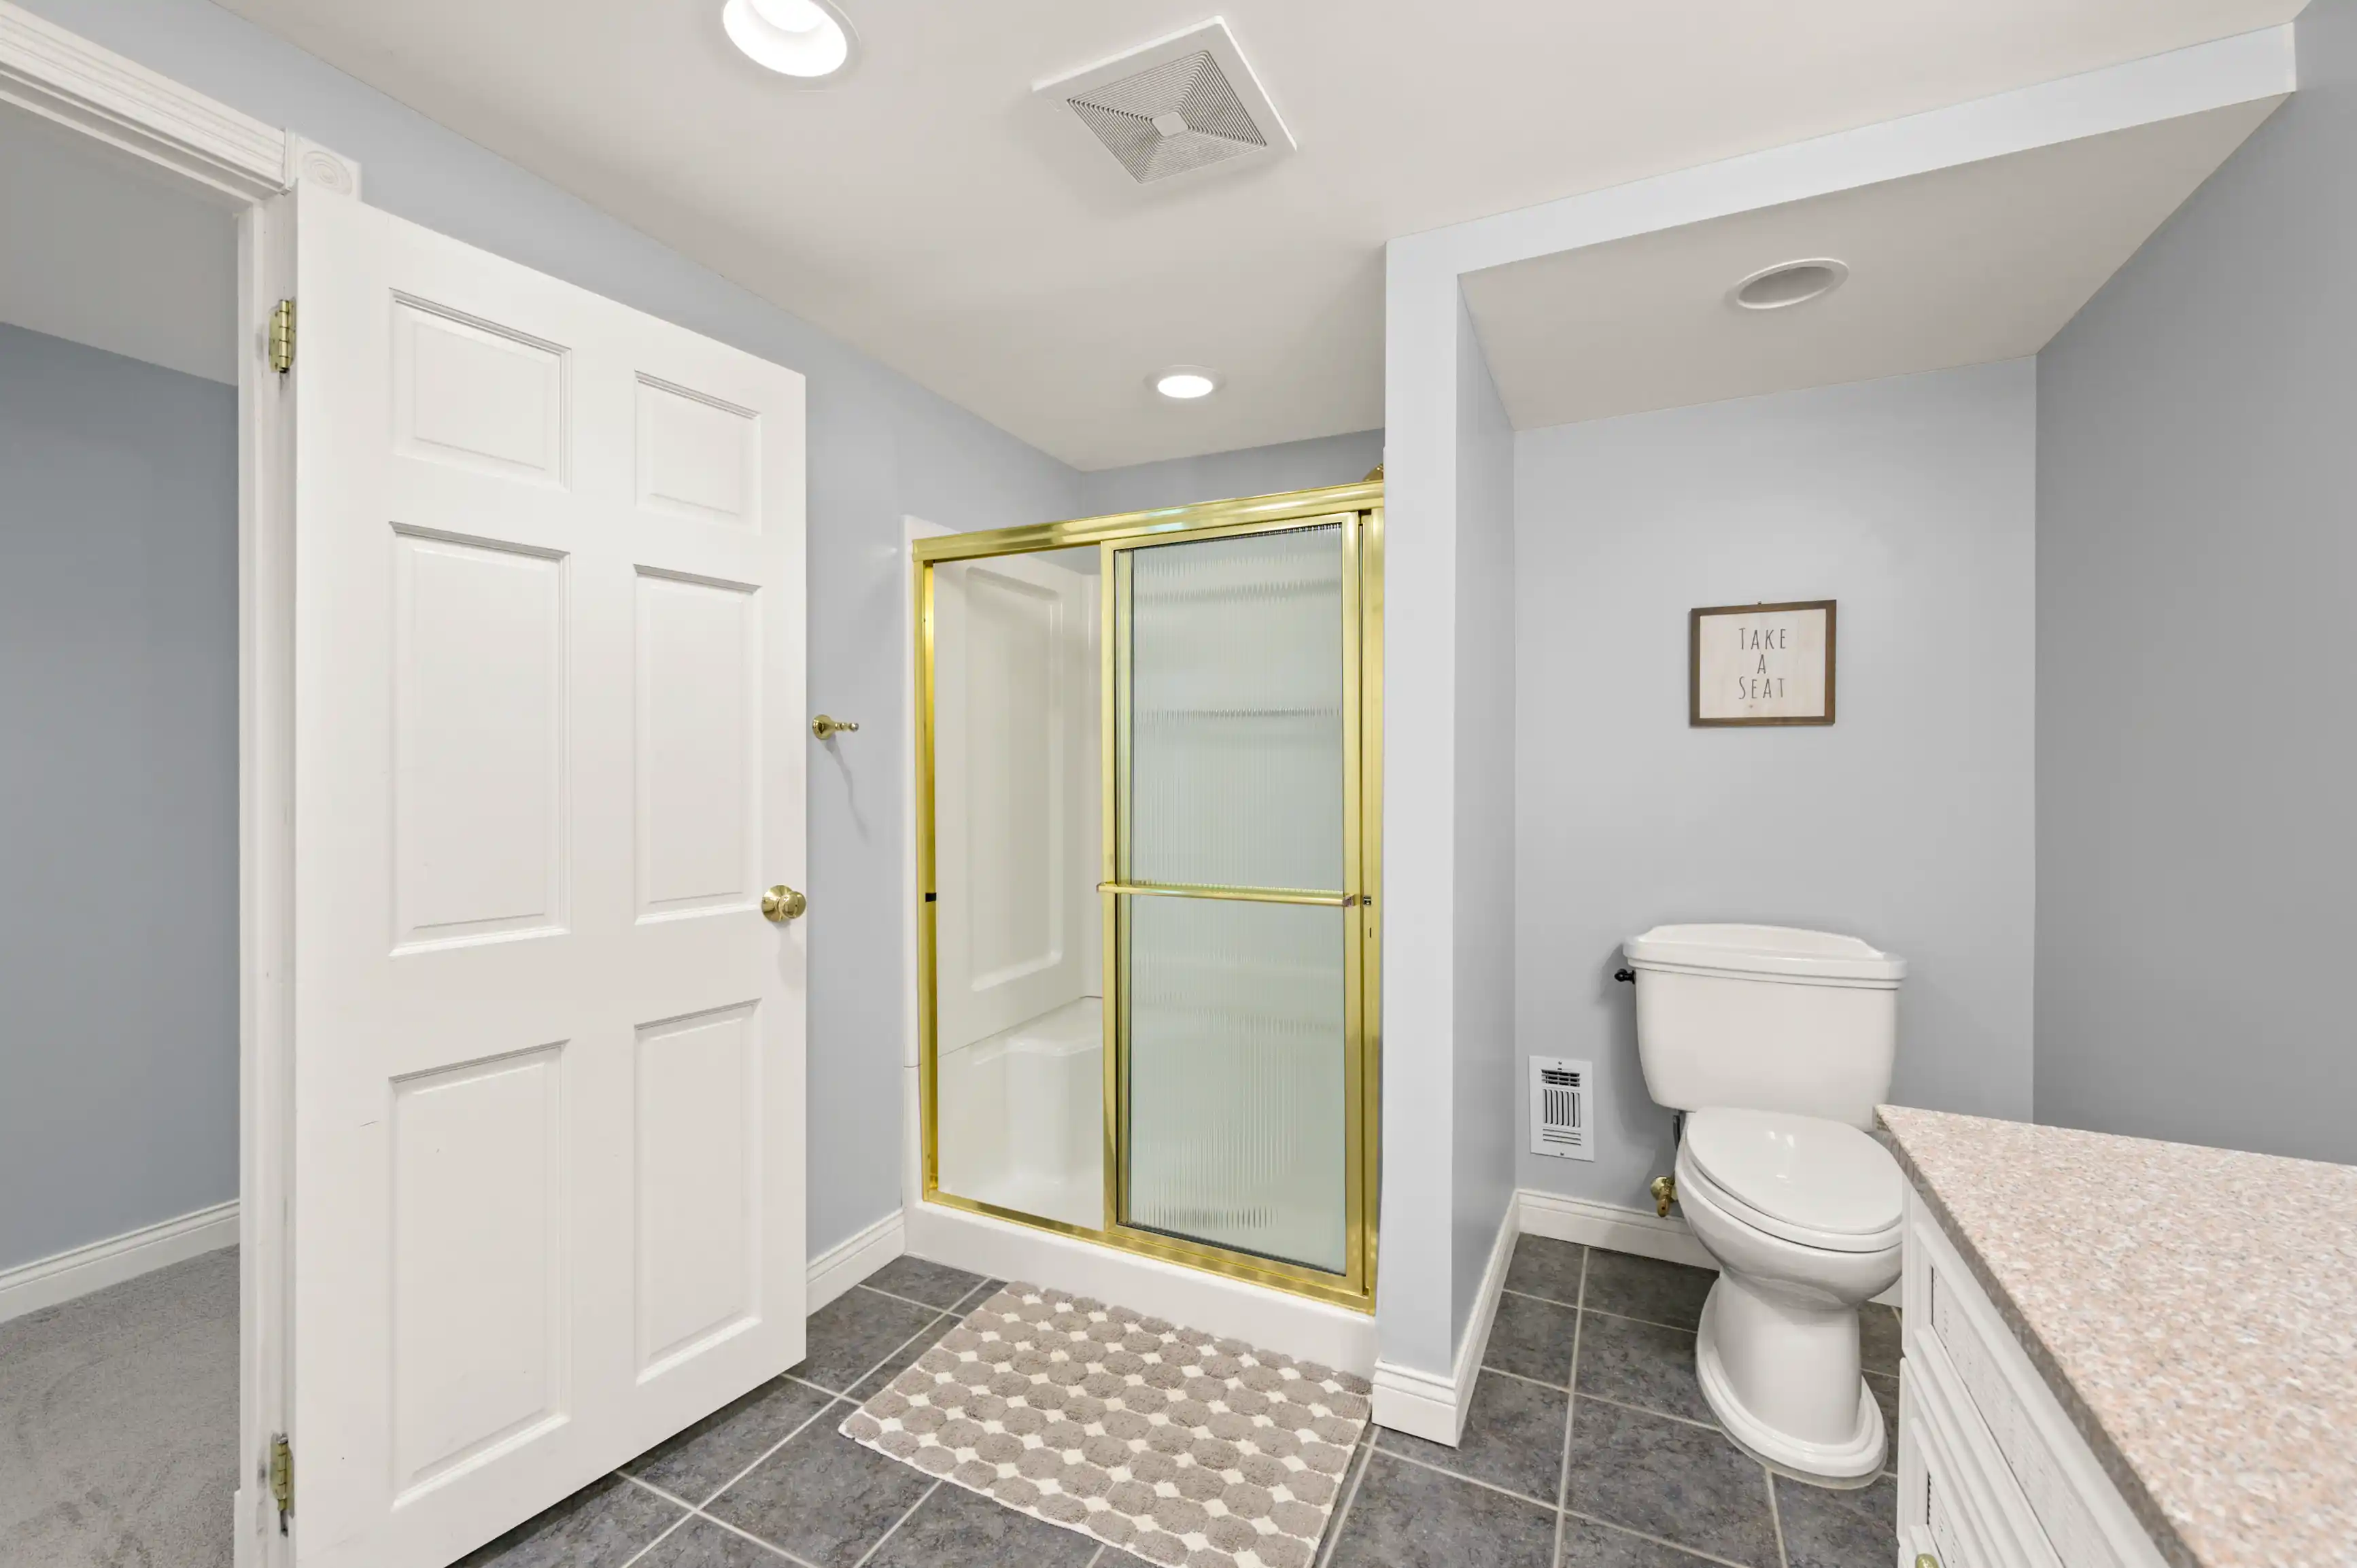 Modern bathroom interior with a closed white door, gray tiled floor, glass-enclosed shower with golden frame, white toilet, and a granite countertop against light blue walls with a decorative sign that reads "TAKE A SEAT".